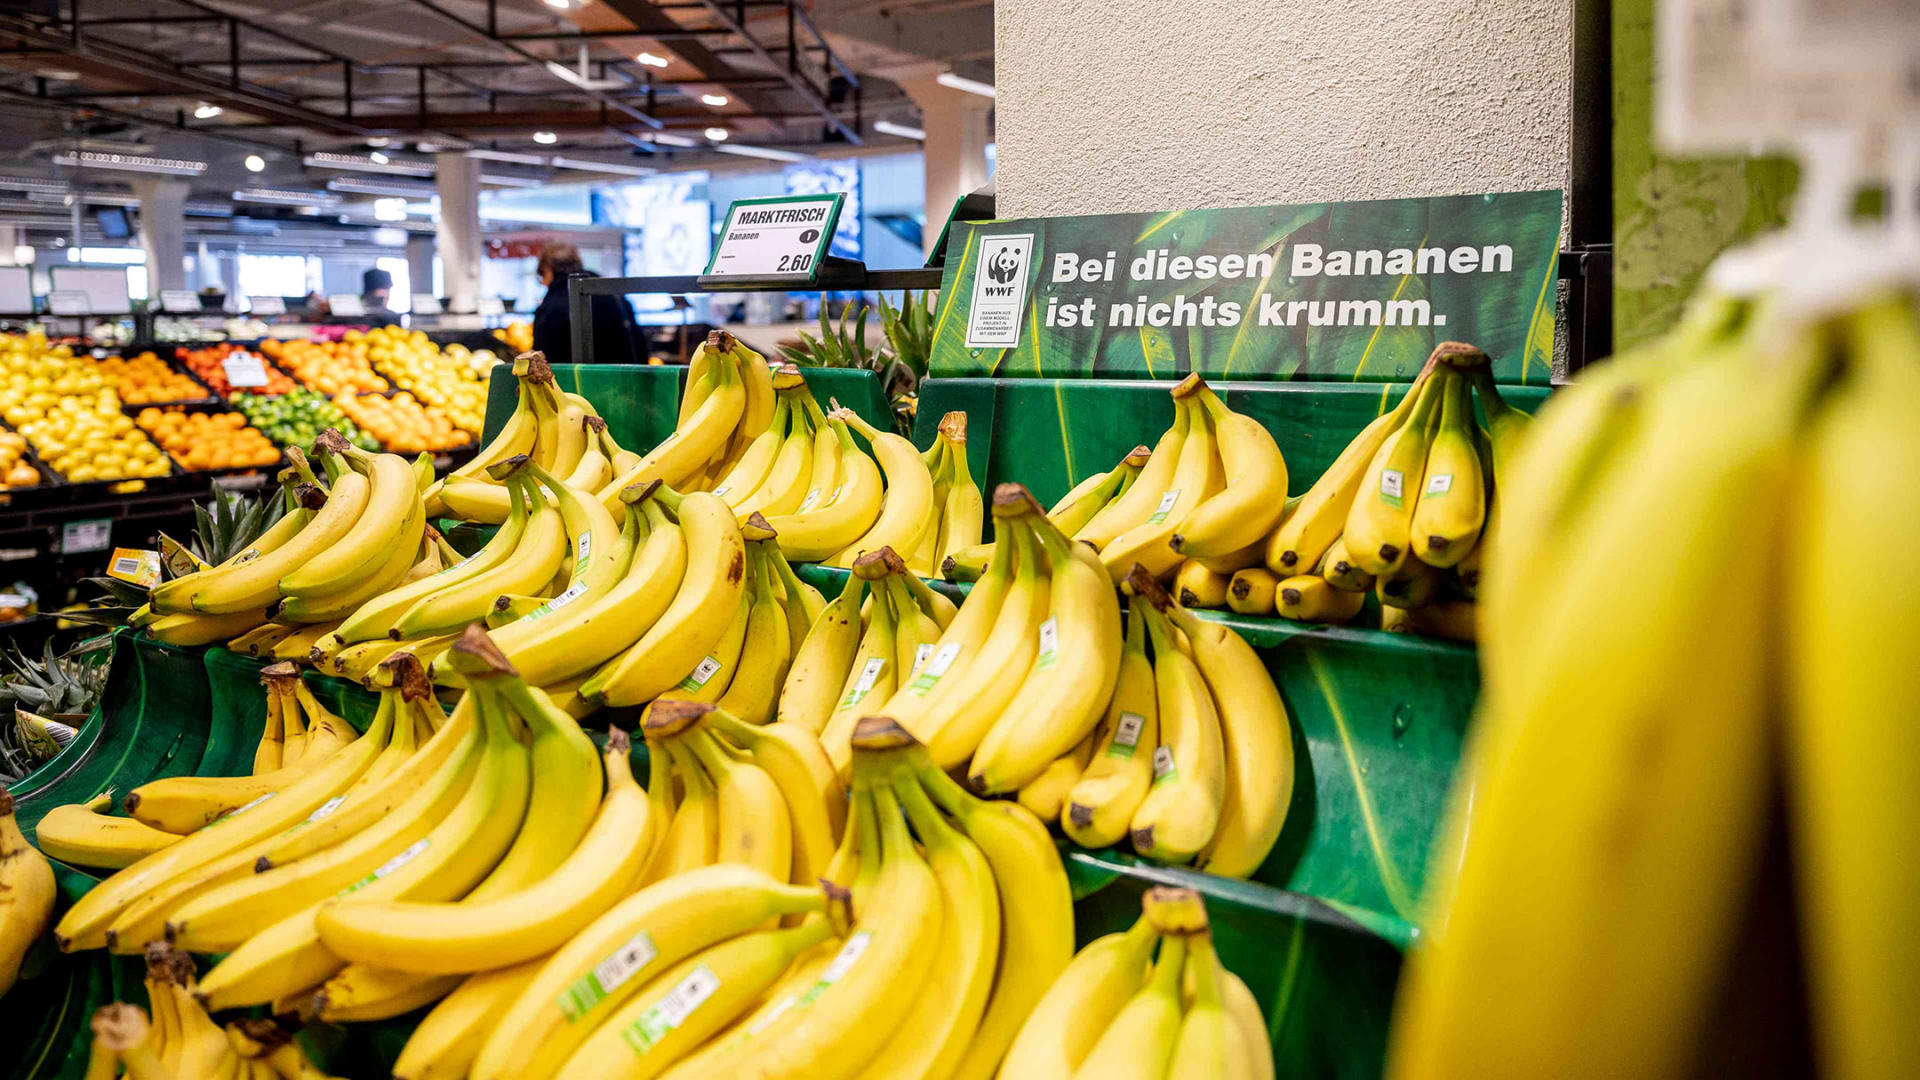 WWF bananas in a Migros store